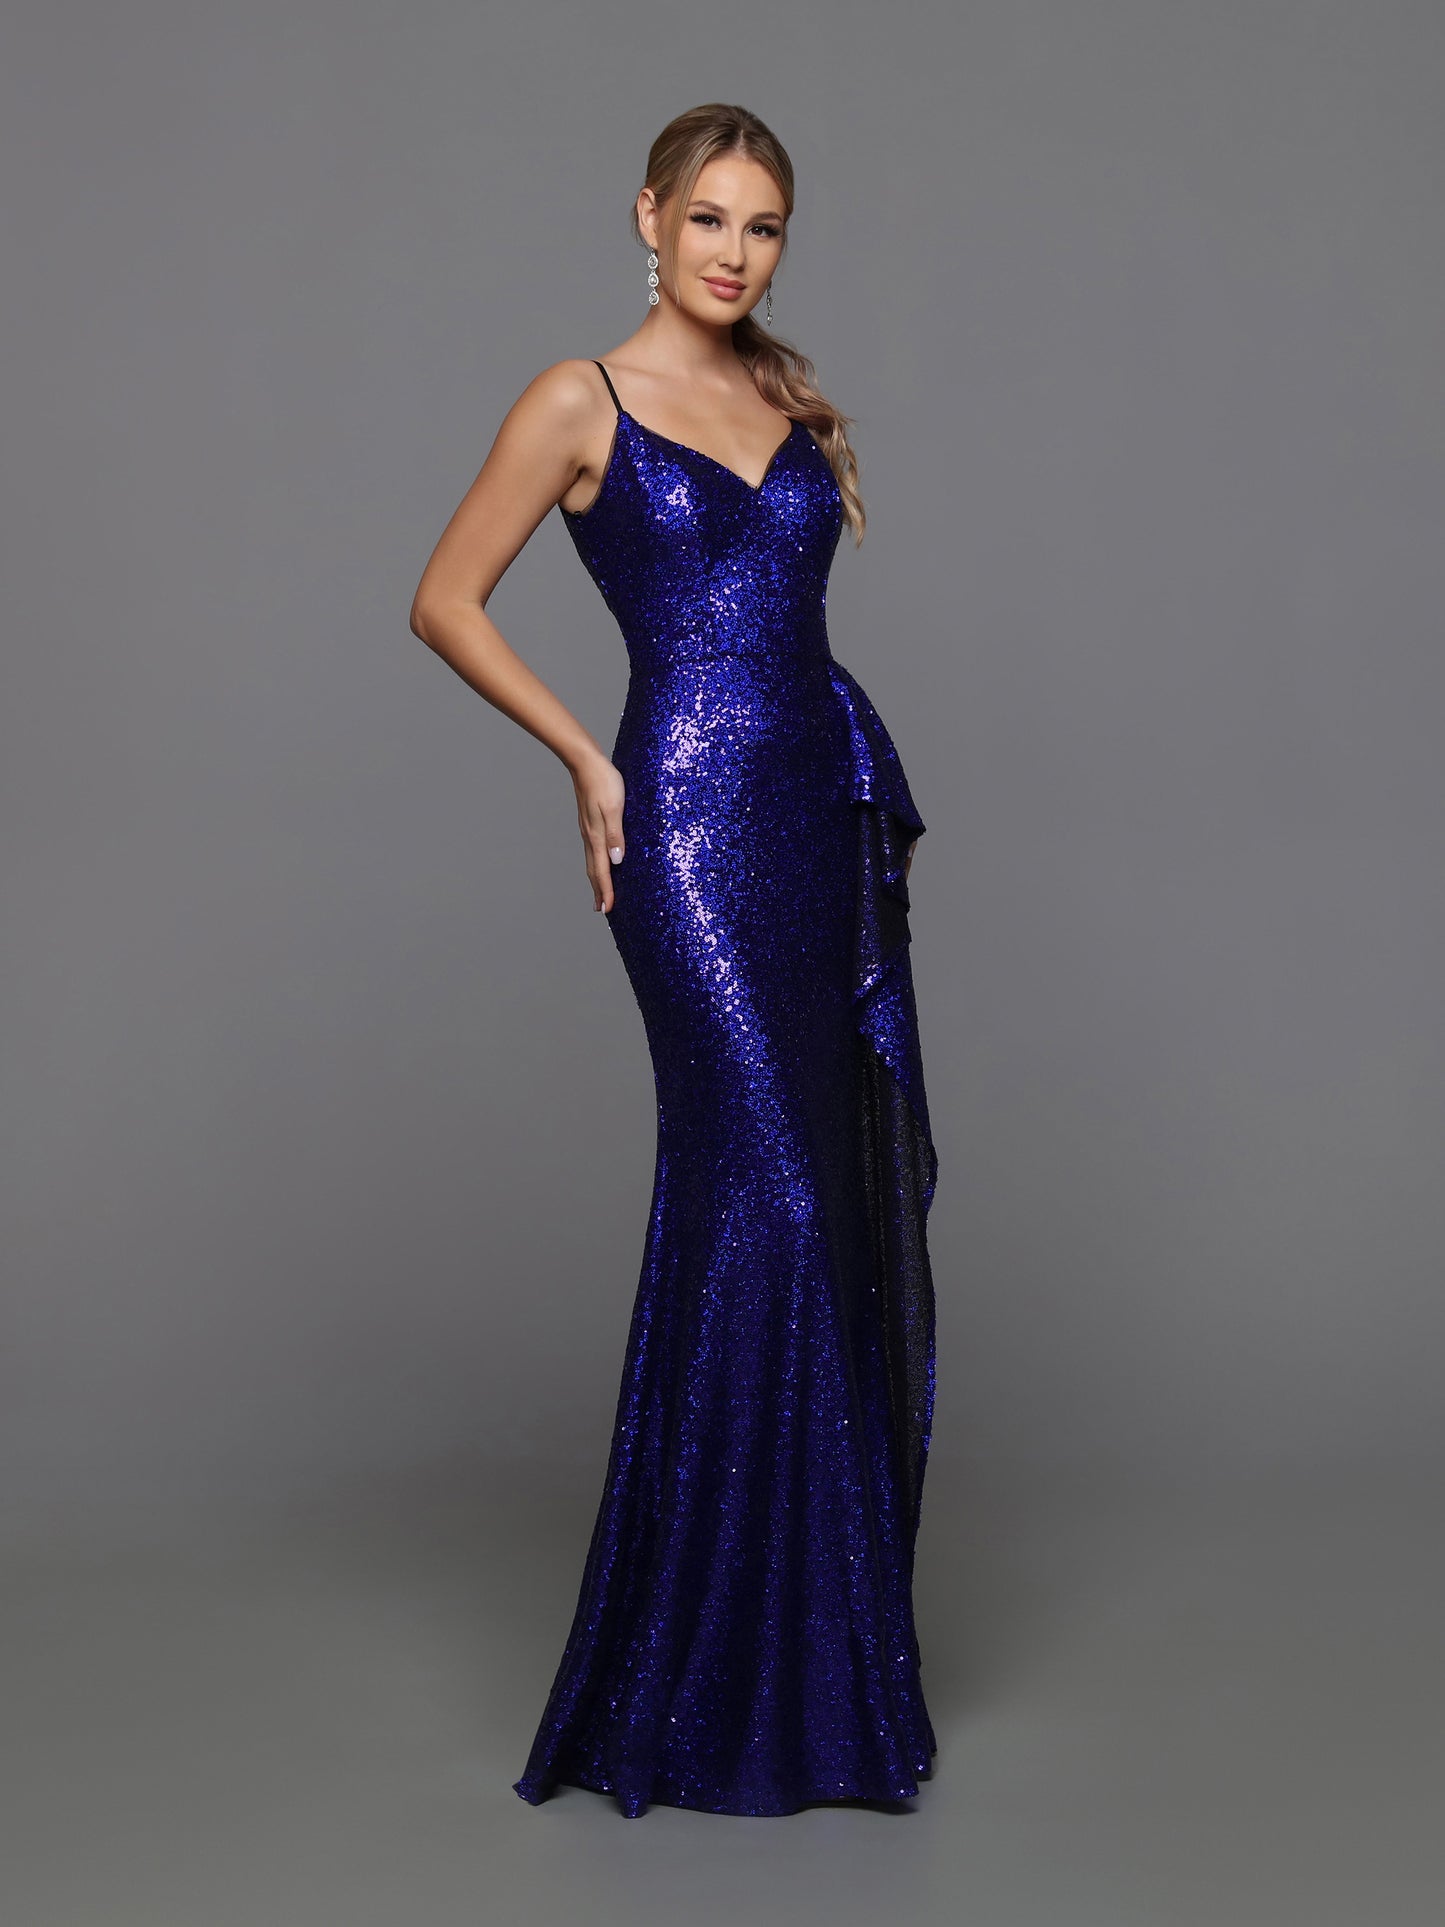 Sparkle Prom 72226 Long Fitted Sequin V Neck Ruffle skirt Prom Dress Evening Gown  Sizes: 0-20  Colors: Gold/Black, Lilac, Cobalt]